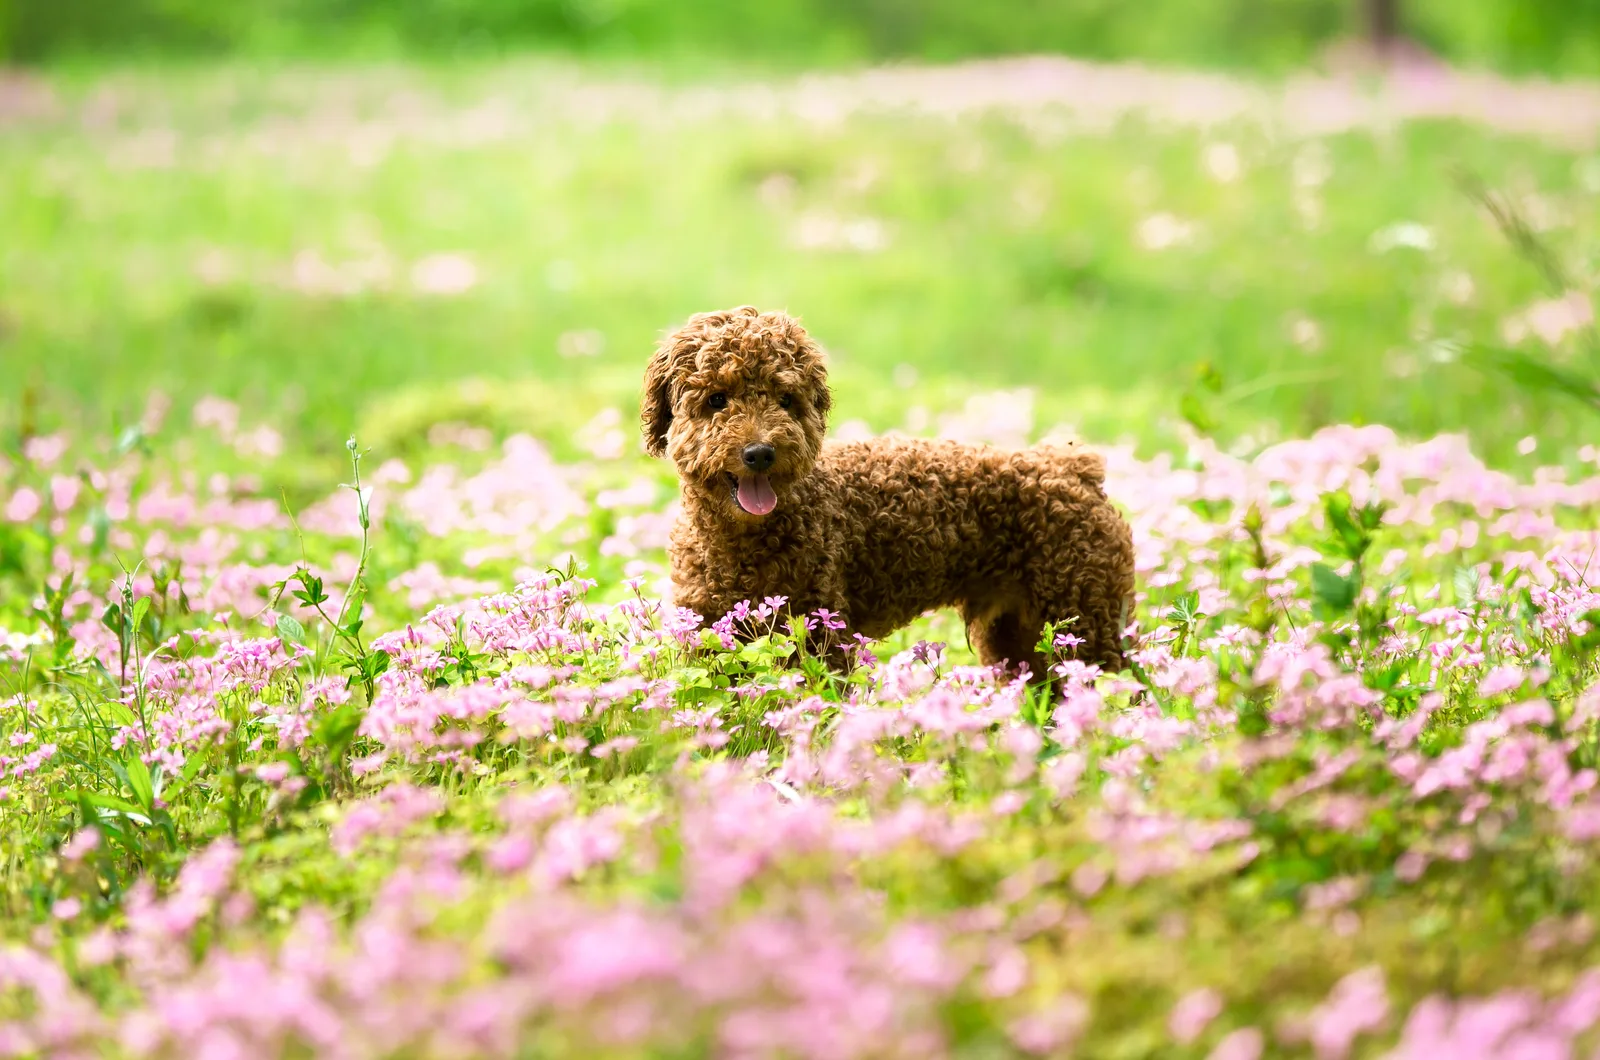 Miniature poodle standing in flowers